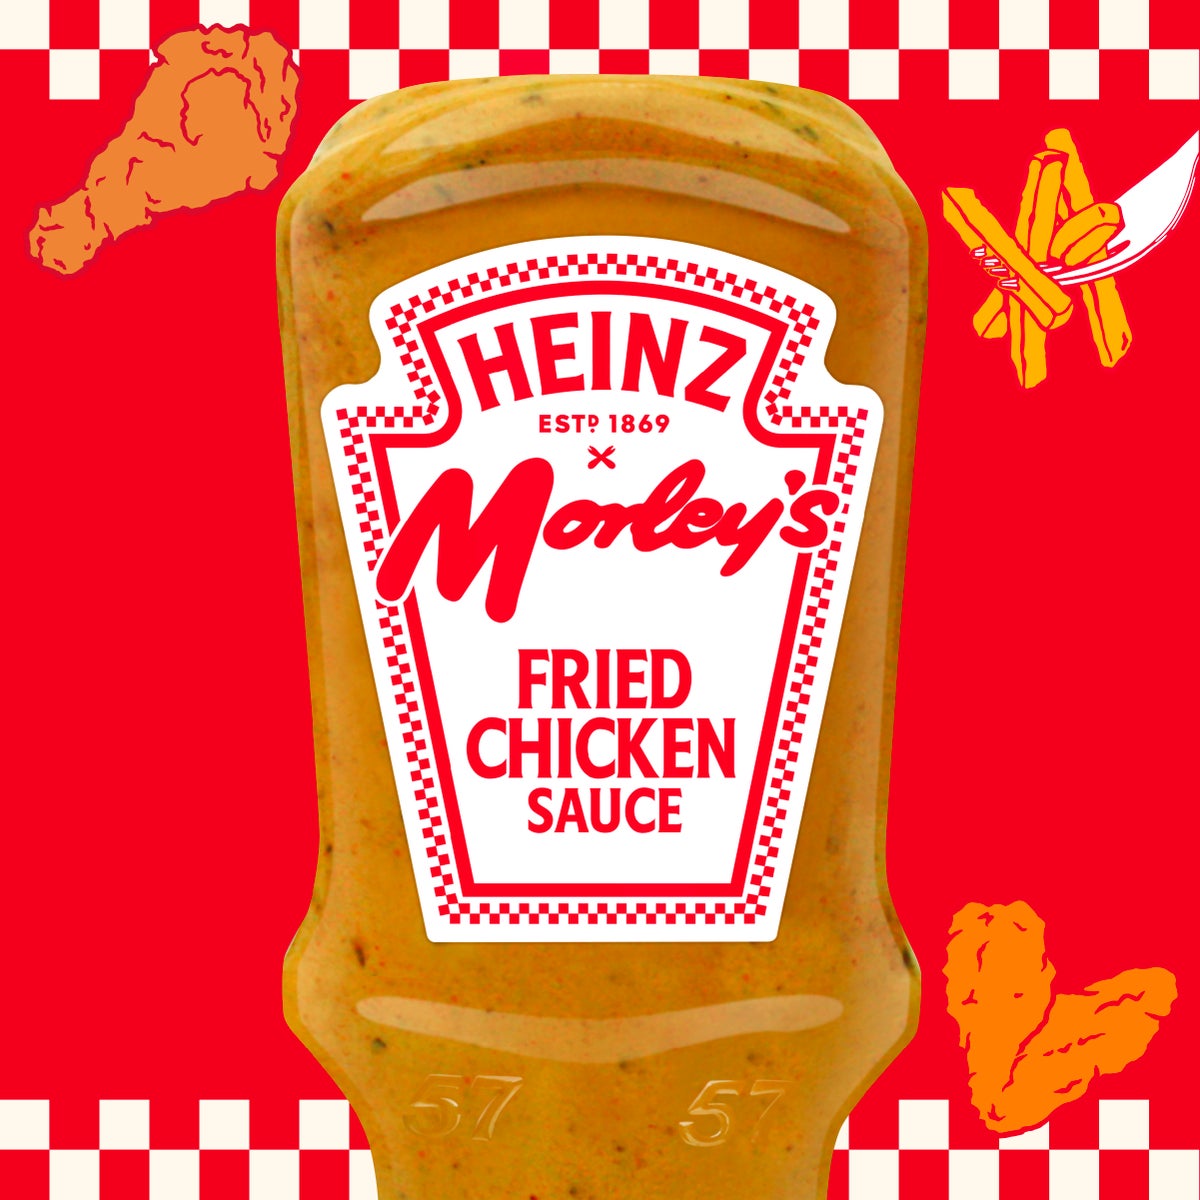 MMM. IT TASTES BETTER TOGETHER! Morely's fried chicken sauce with heinz